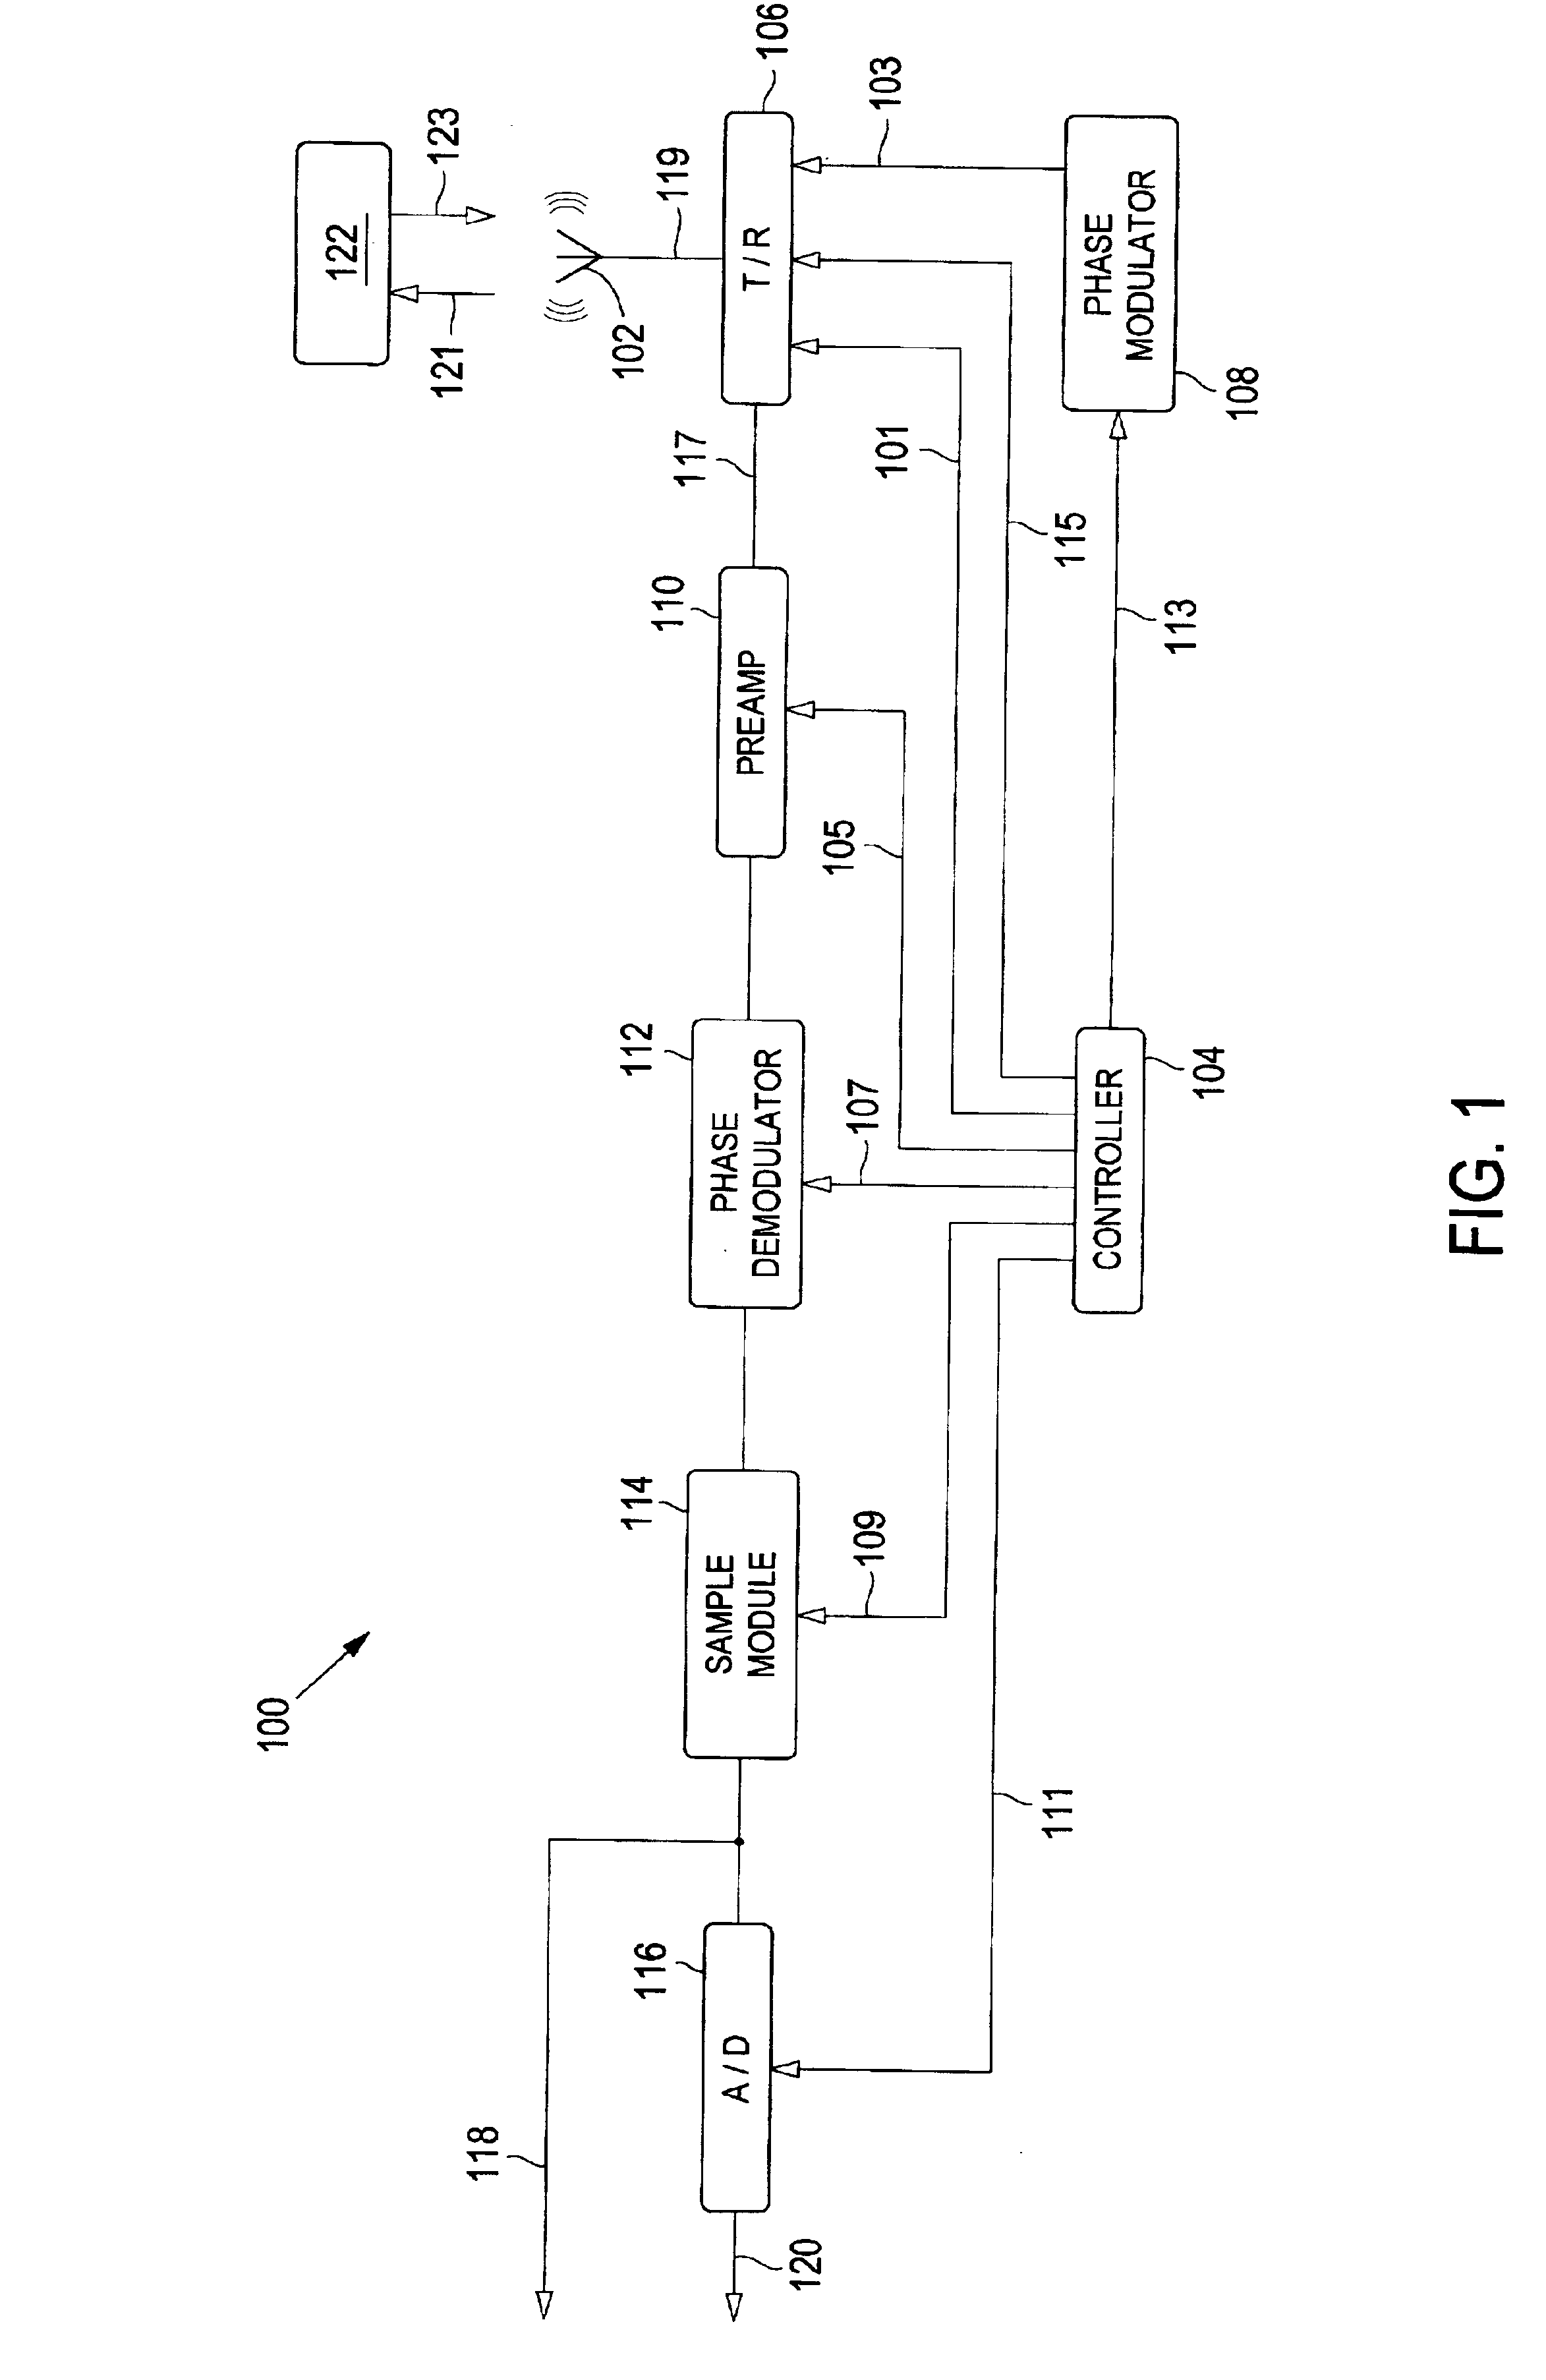 Sensor front-end with phase coding capability